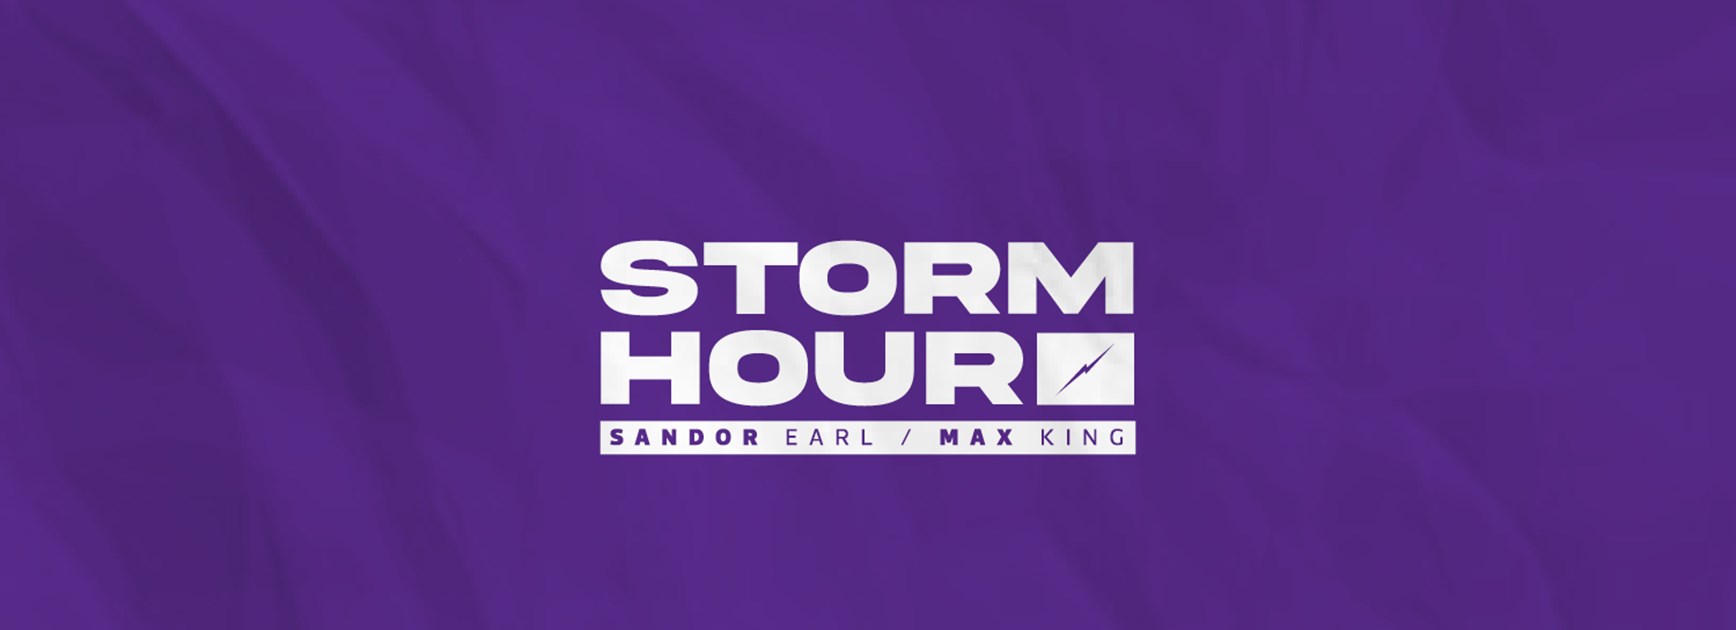 The Storm Hour is back